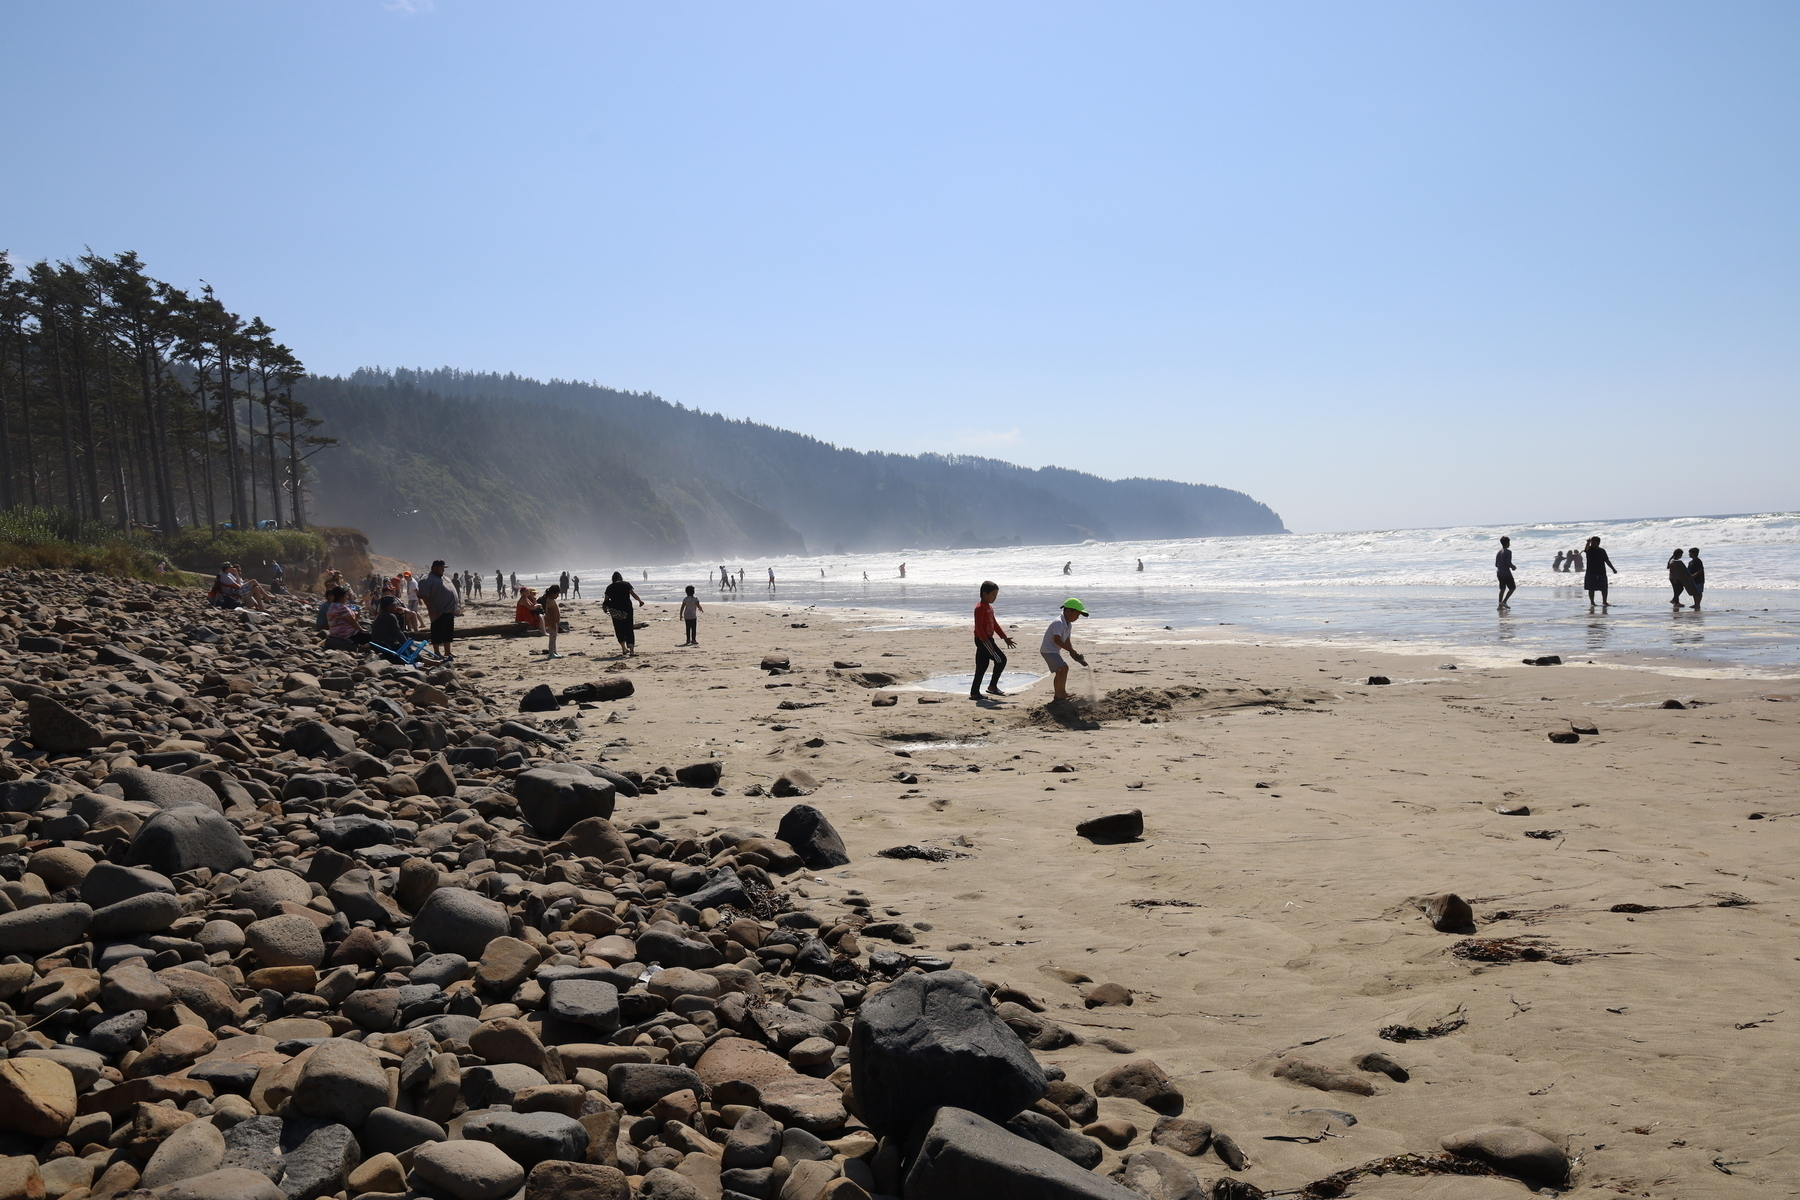 A view looking north at the Oregon coast where Cape Lookout juts out into the ocean. Childs and adults play in the narrow beach between the rocks and the ocean. 